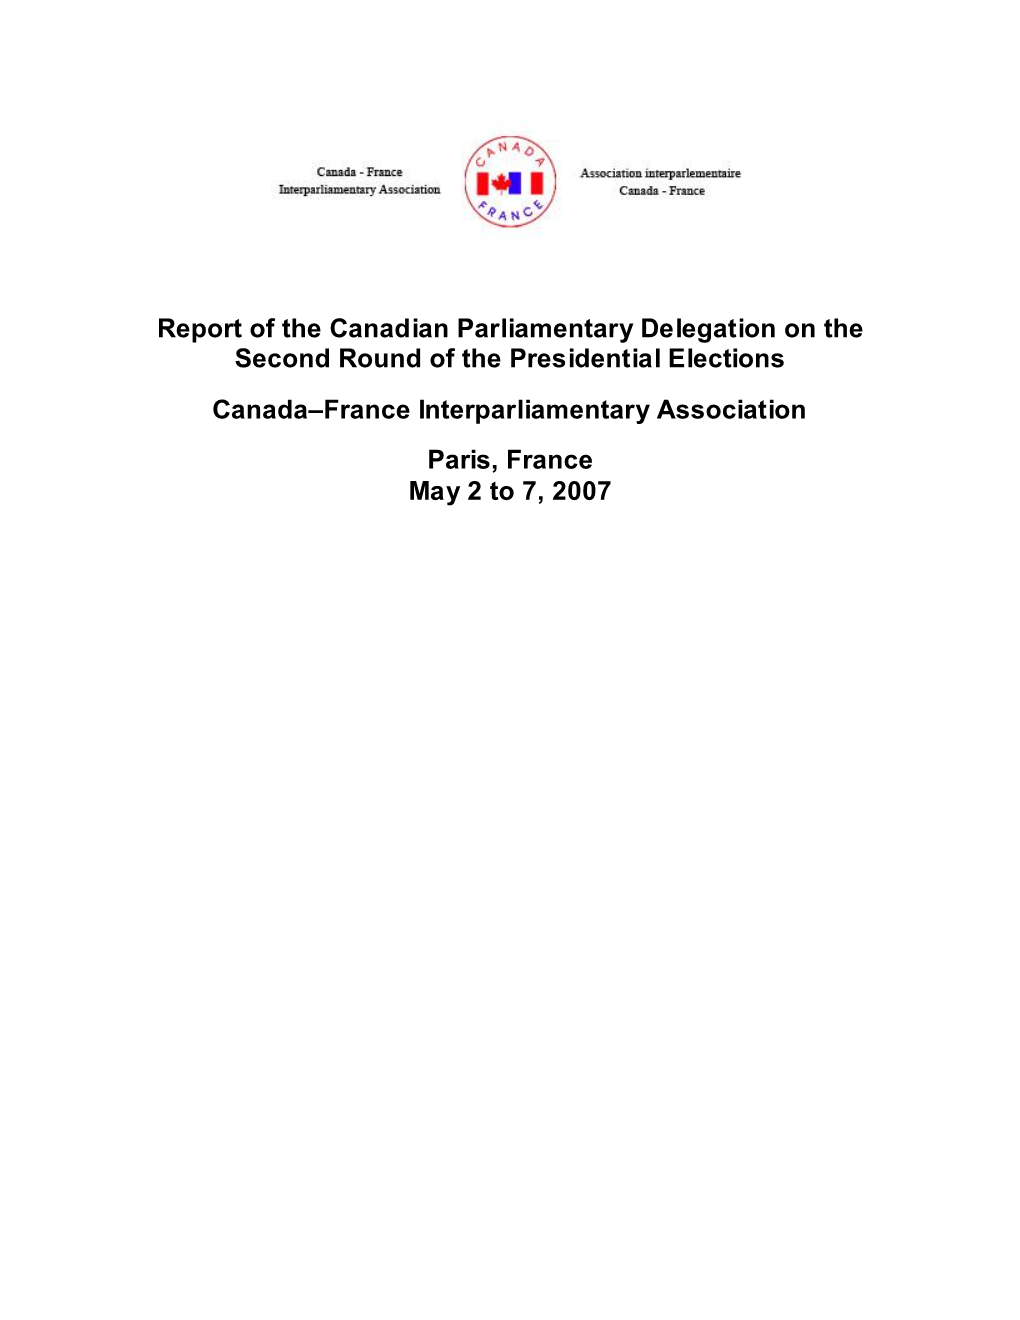 Report of the Canadian Parliamentary Delegation on the Second Round Of